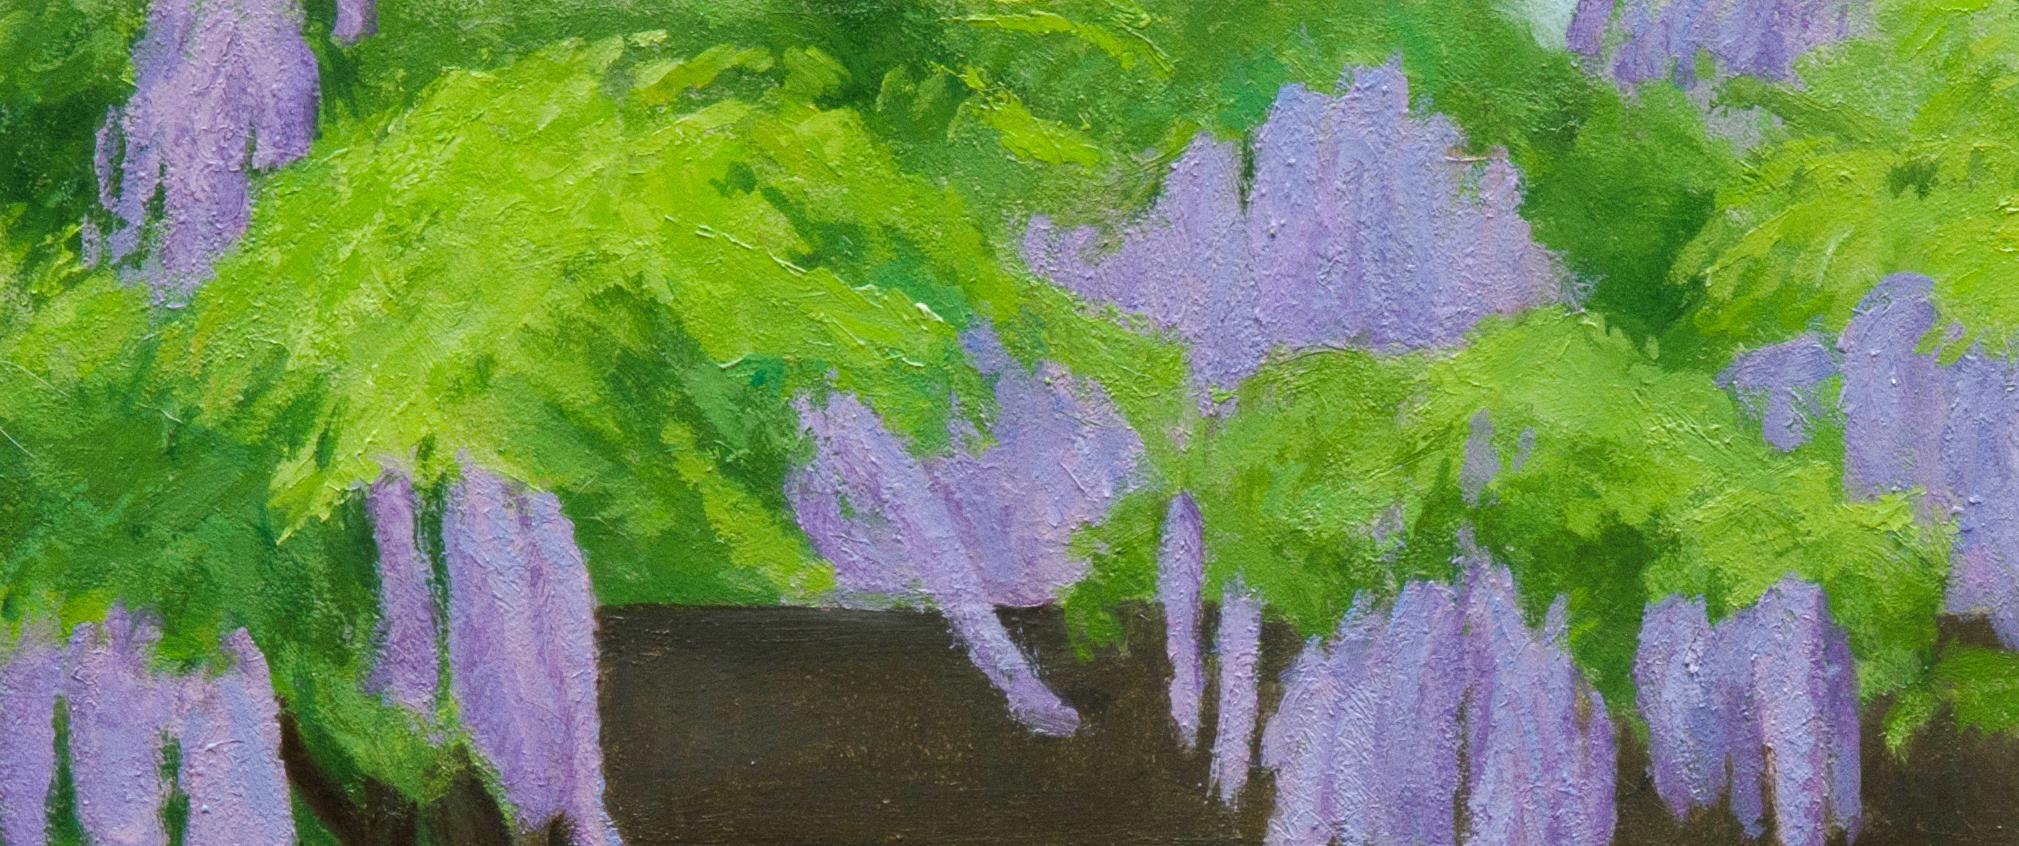 wisteria willow tree painting